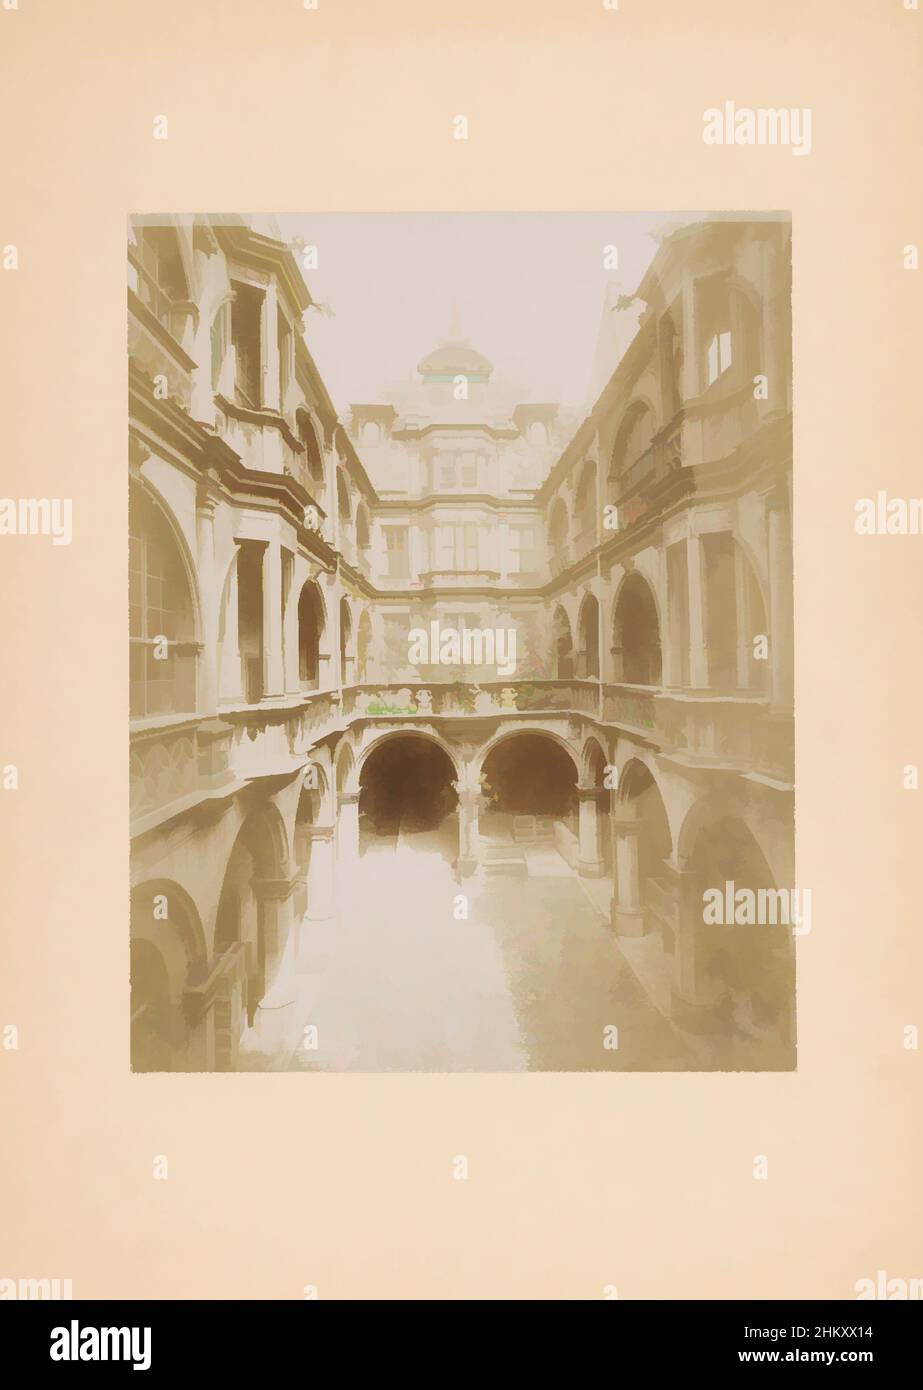 Art inspired by Courtyard of the Pellerhaus at Nuremberg, Courtyard of the Peller House at Nuremberg., publisher: W. Ebel, Neurenberg, c. 1875 - c. 1900, cardboard, photographic support, height 272 mm × width 212 mm, Classic works modernized by Artotop with a splash of modernity. Shapes, color and value, eye-catching visual impact on art. Emotions through freedom of artworks in a contemporary way. A timeless message pursuing a wildly creative new direction. Artists turning to the digital medium and creating the Artotop NFT Stock Photo